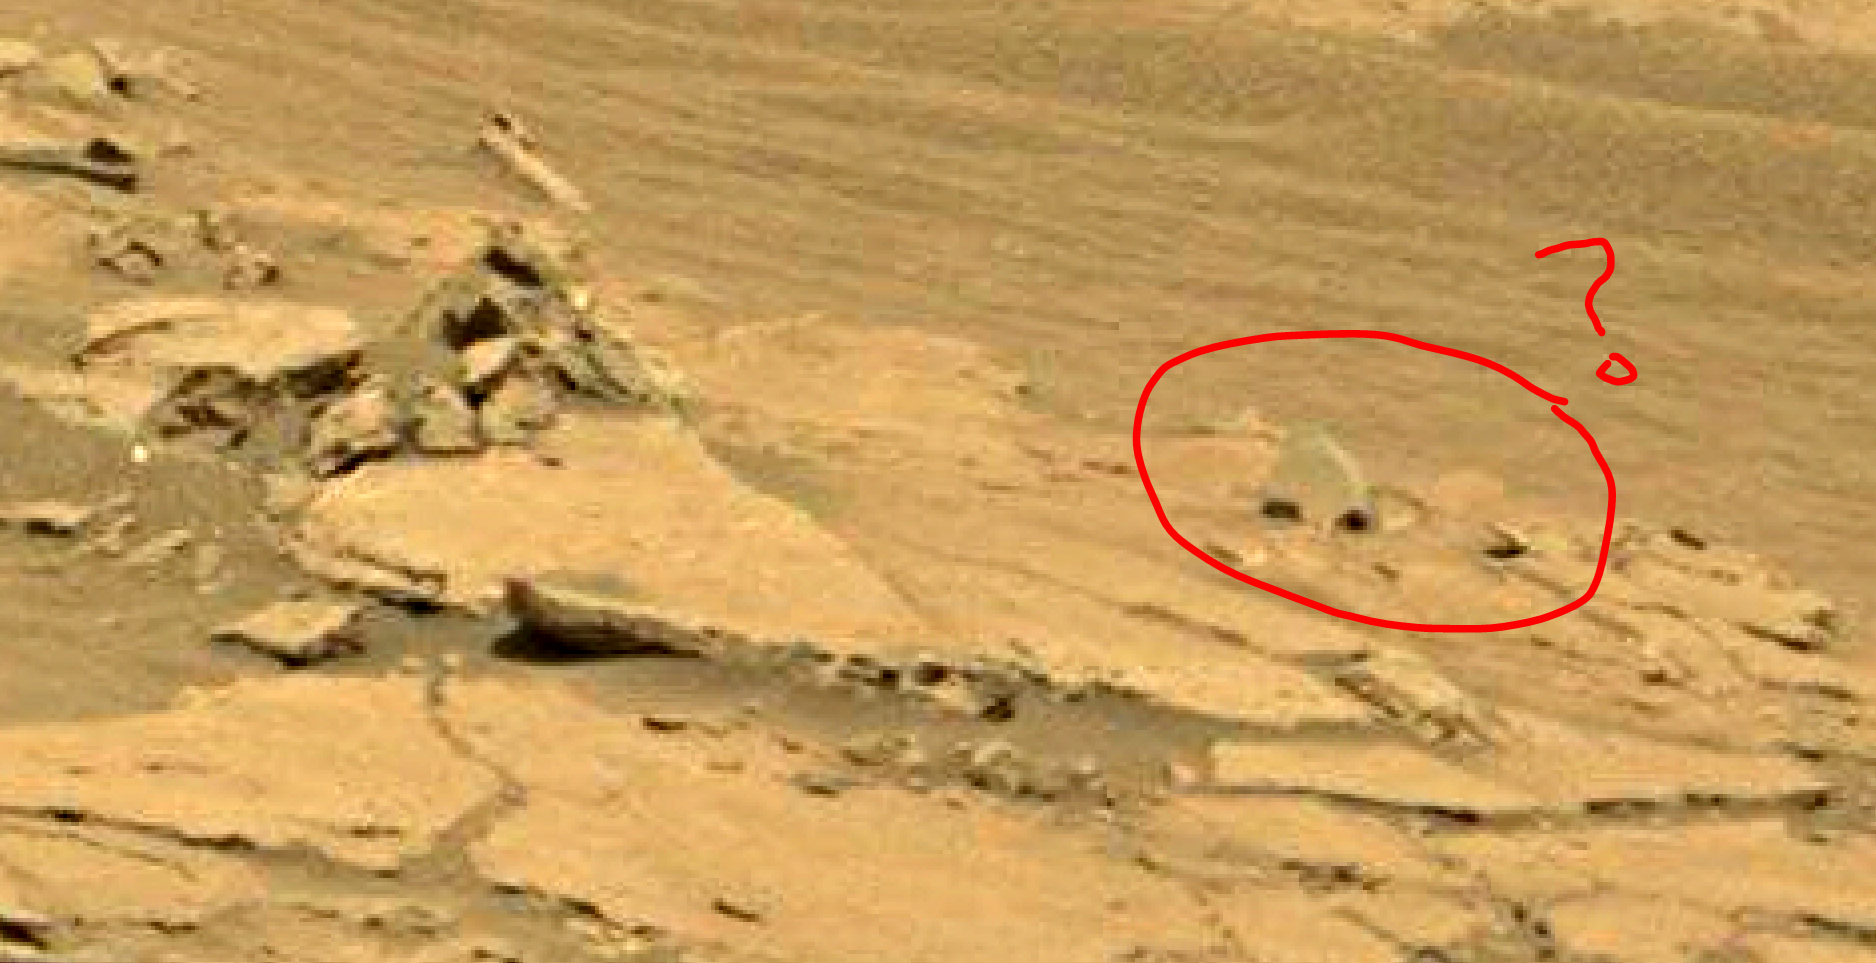 mars sol 1353 anomaly-artifacts 53 was life on mars